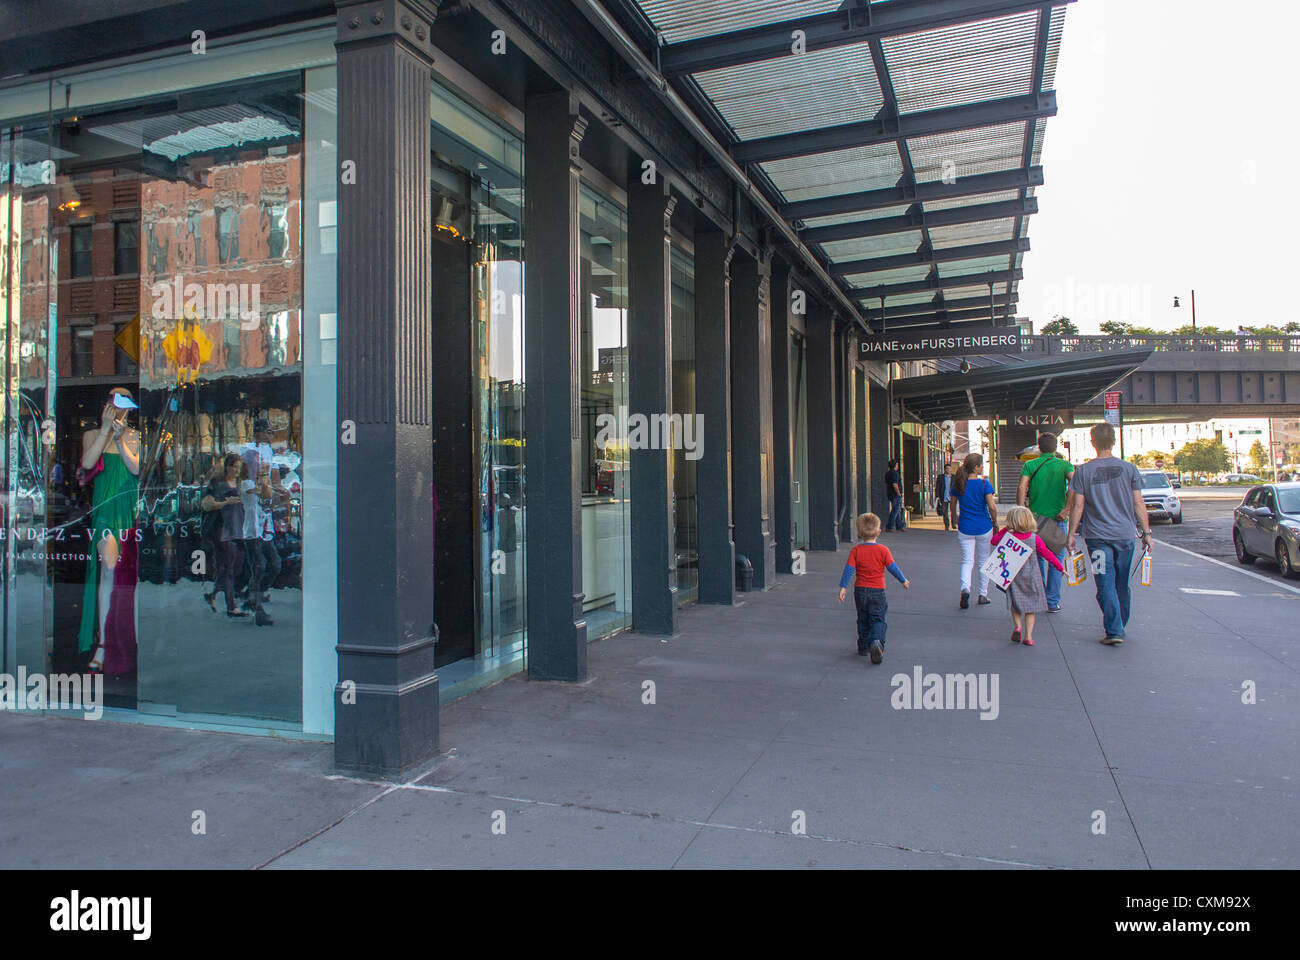 New York City, NY, USA, Group People, Family, Walking Away, Street Scenes in the Meatpacking District, People Shopping, gentrification  [USA] new yorkers buildings Stock Photo